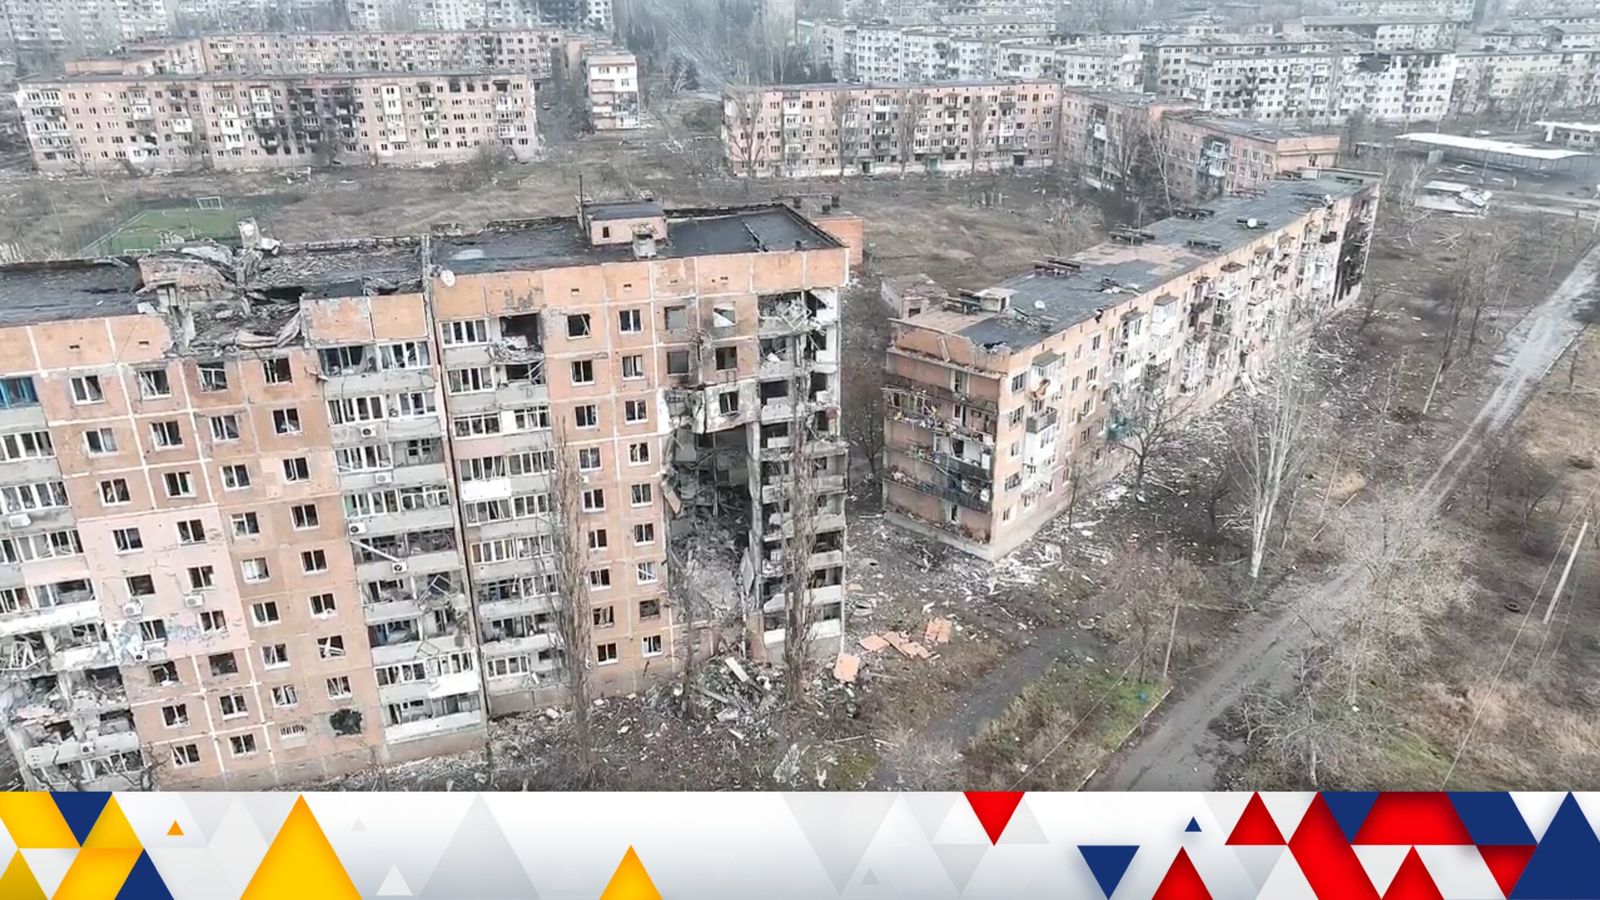 Missile ‘hits apartment building in Kharkiv’; Russian athletes in Olympics would show terror is acceptable, says Zelenskyy | Ukraine latest